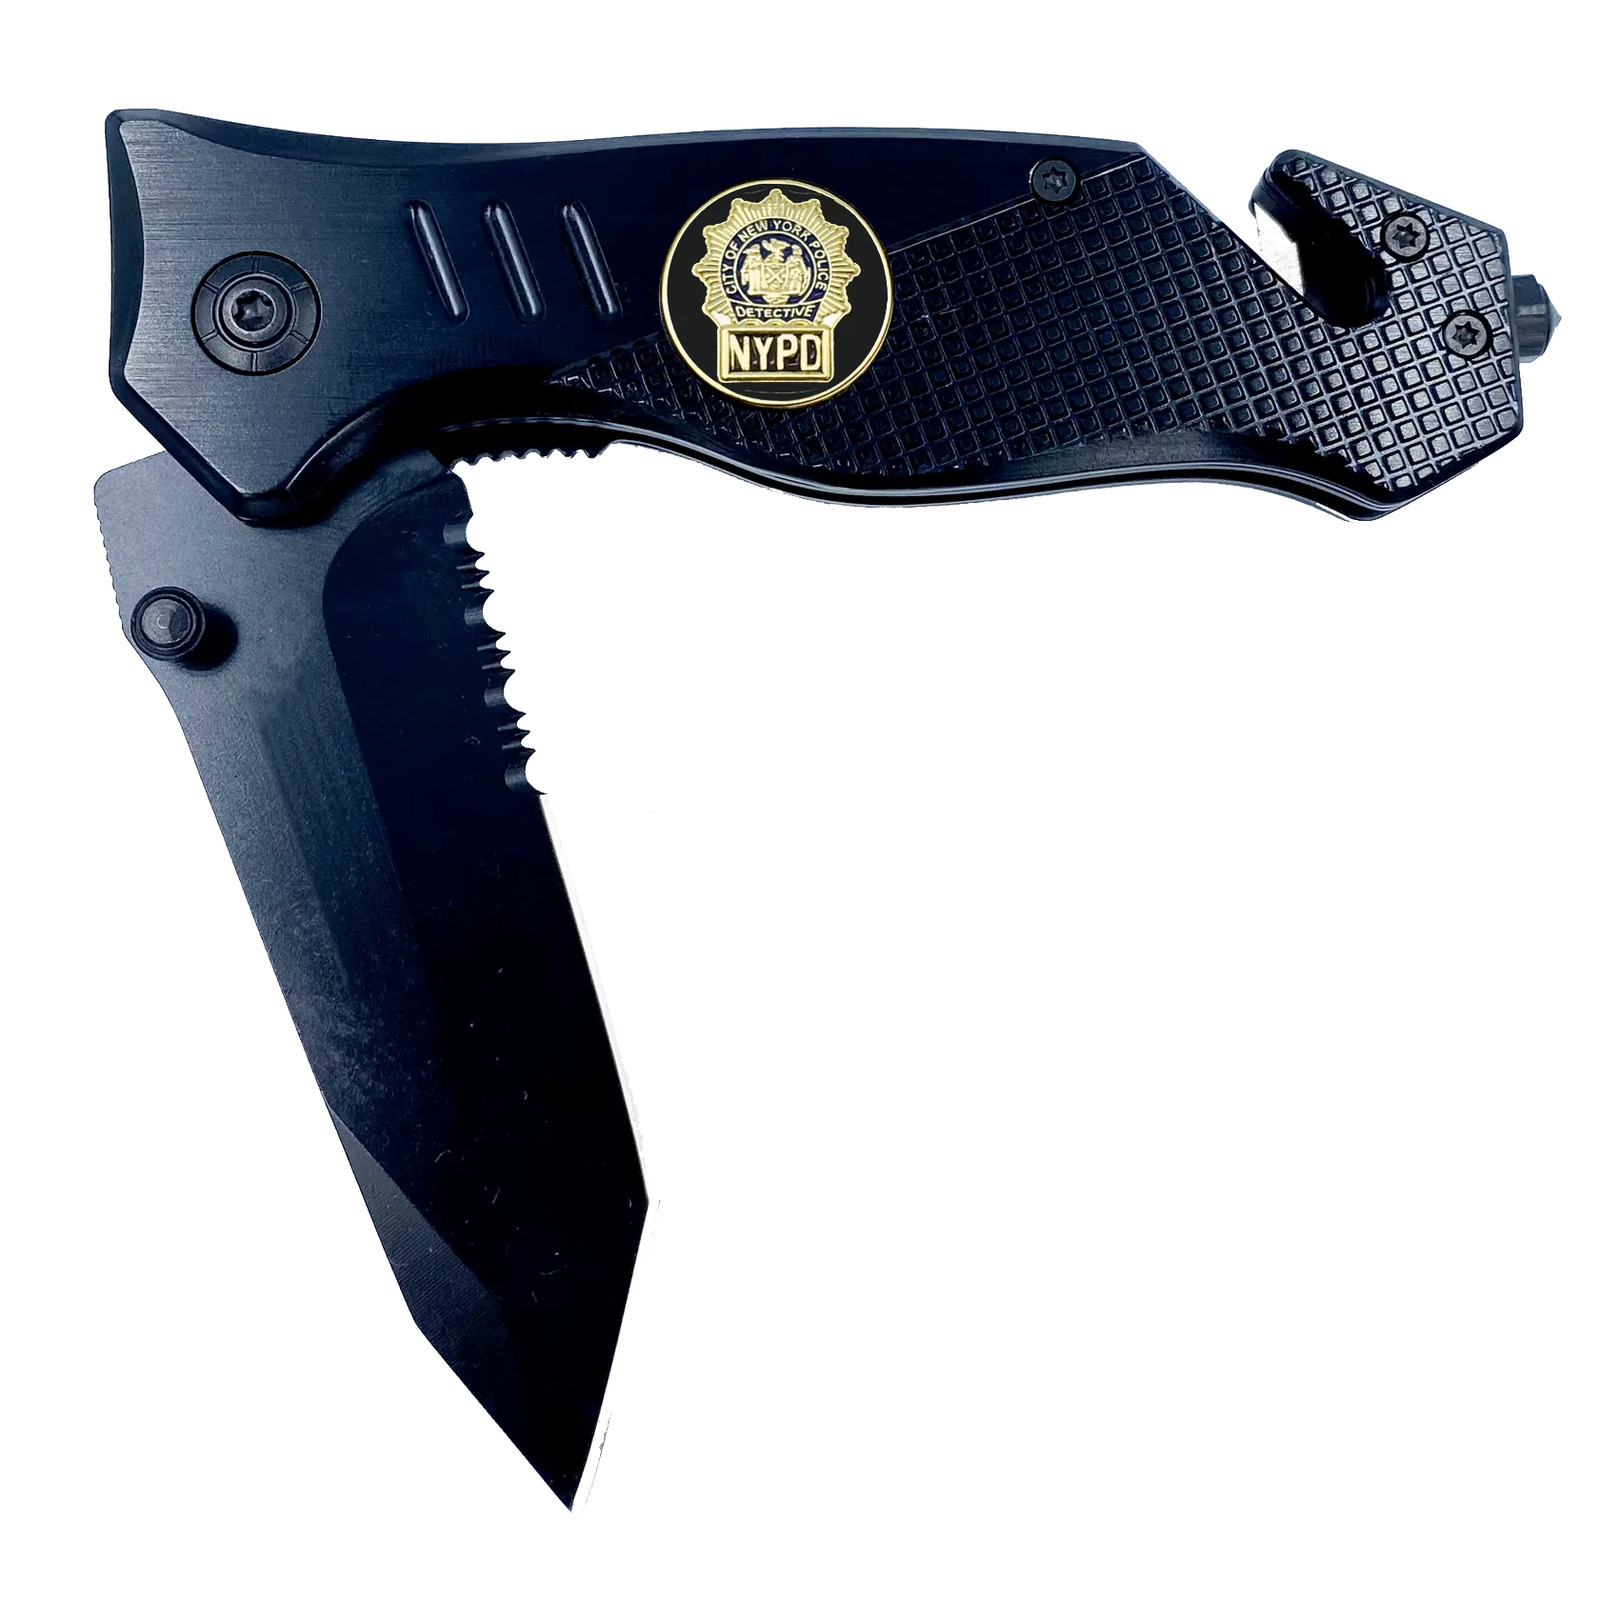 NYPD Detective Knife 3-in-1 Military Tactical Rescue tool knife with Seatbelt Cu